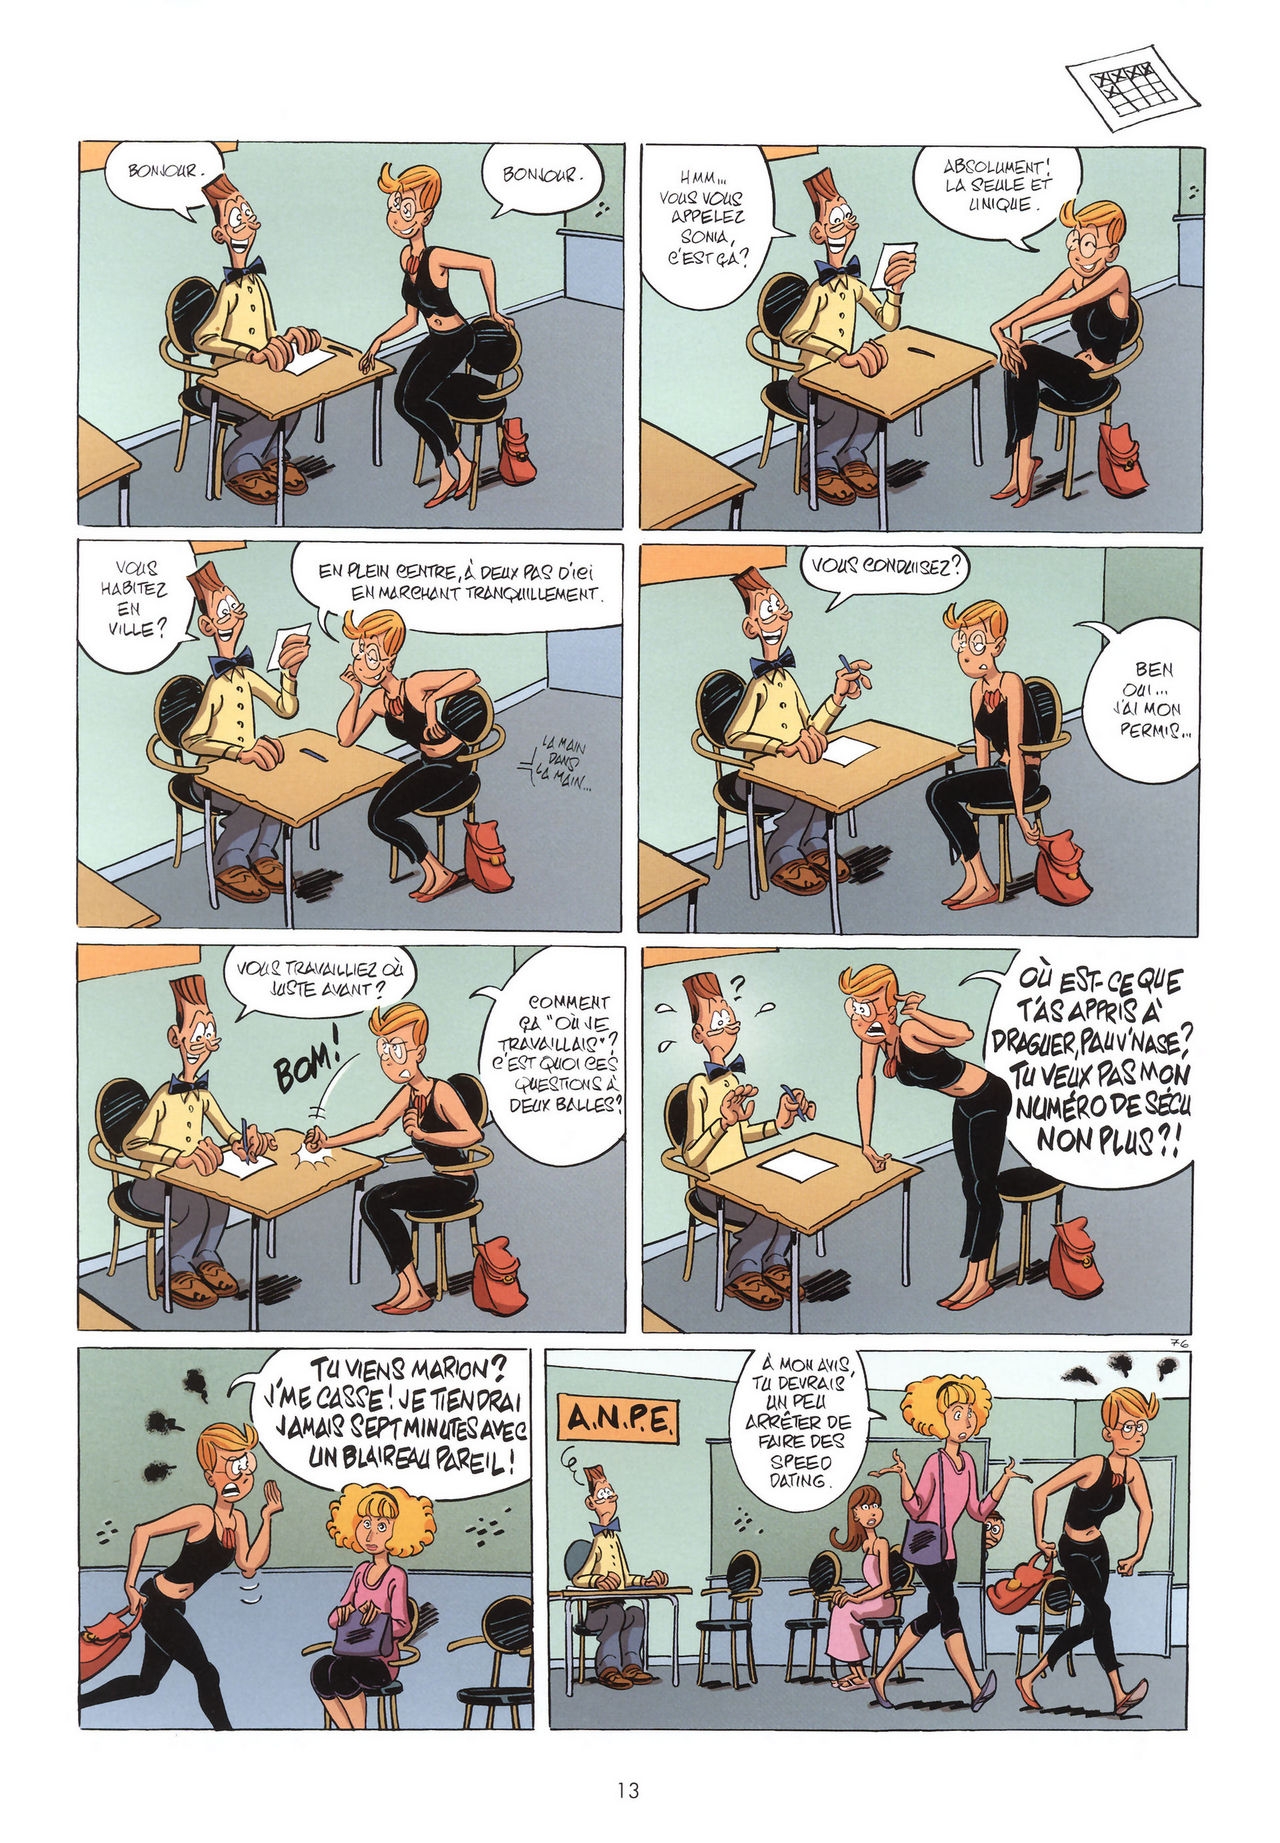 Plan Drague - Tome 02 - Franche Connexion [french] 13